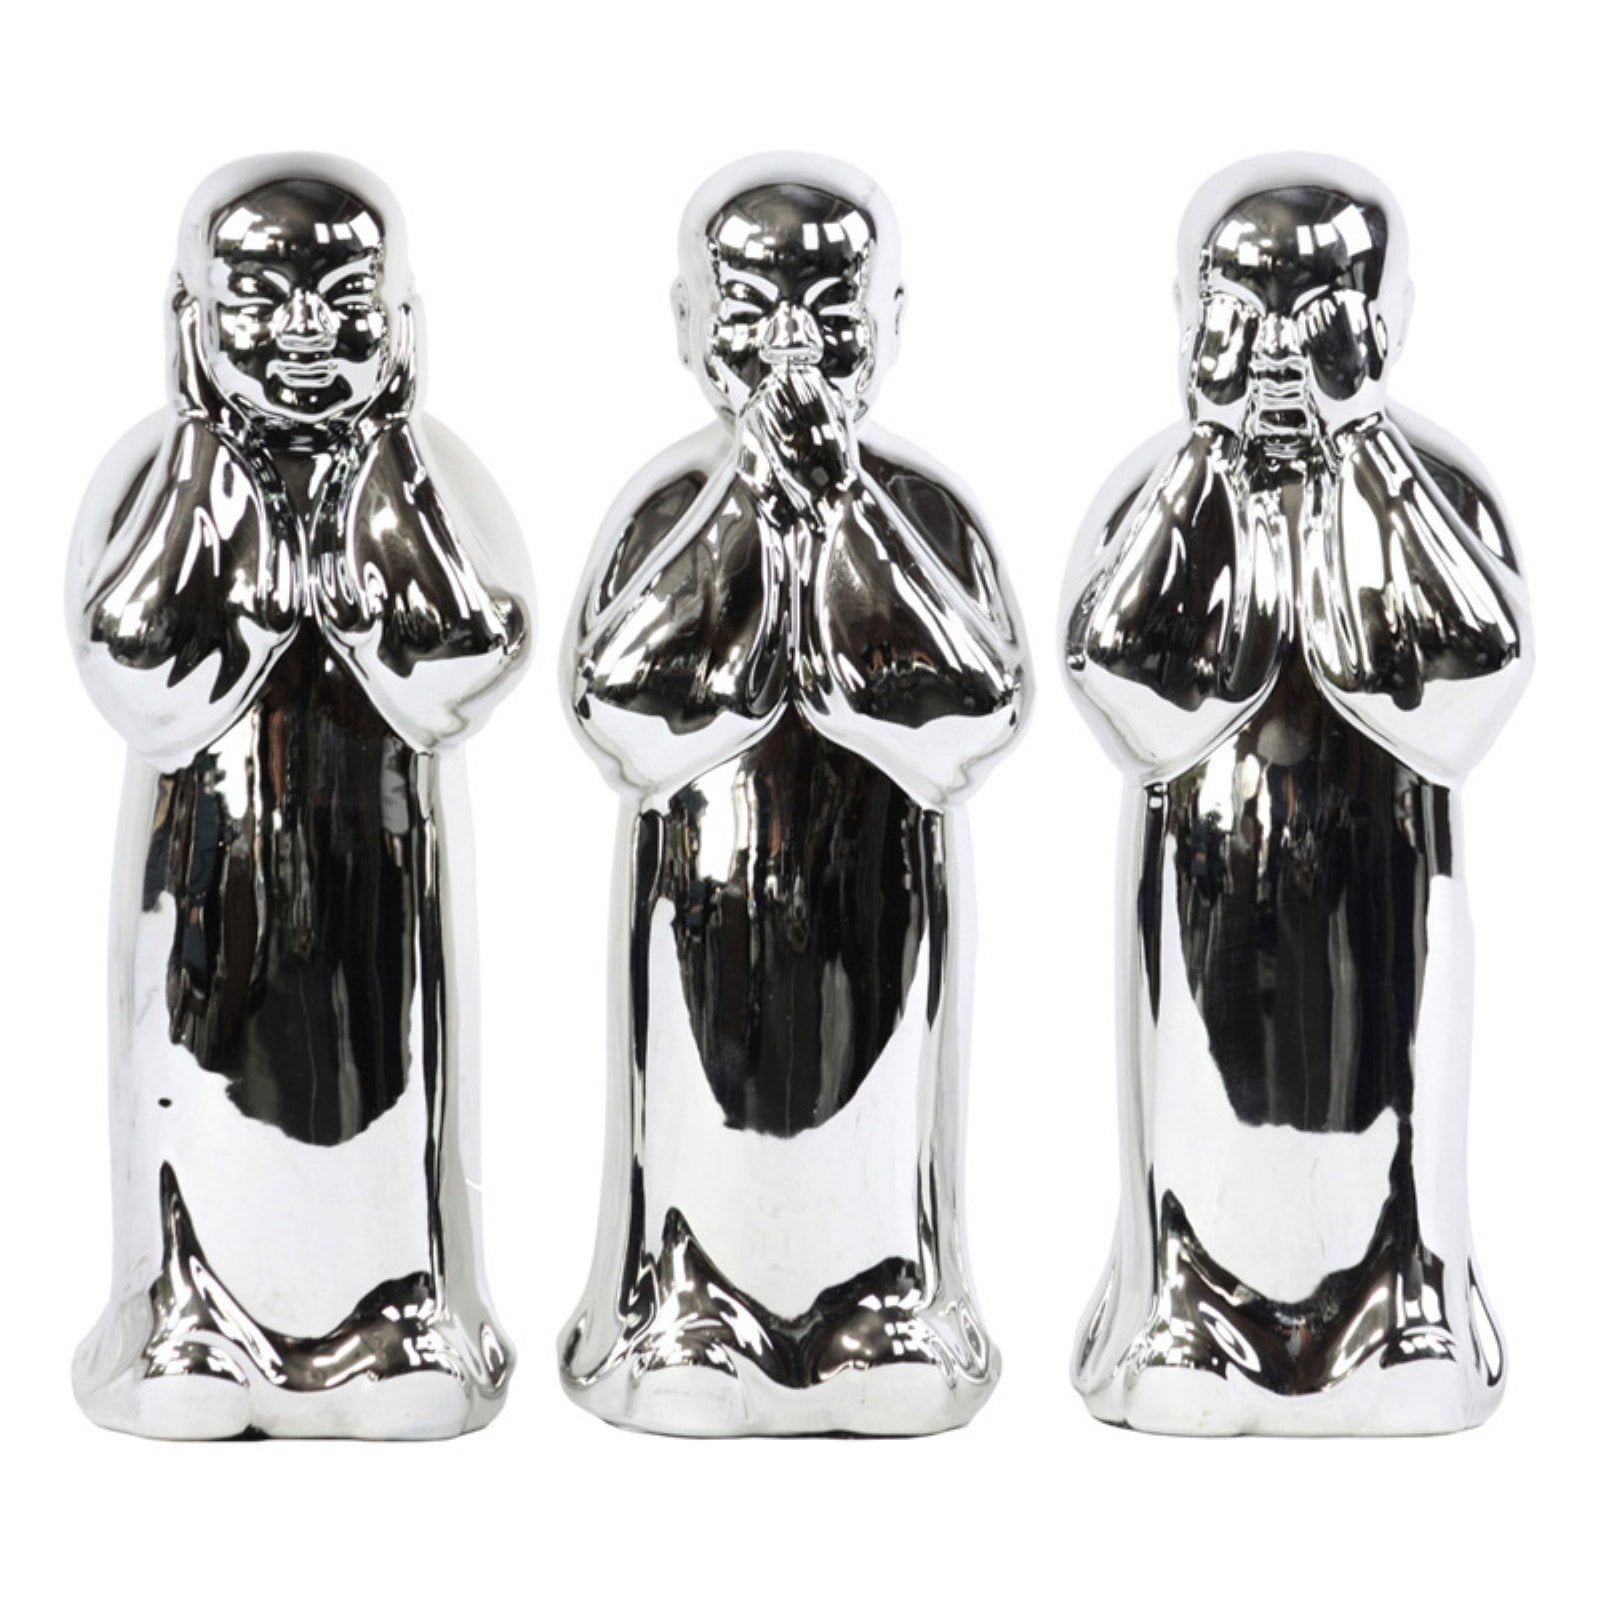 Urban Trends Porcelain Standing Monk Figurine Polished Chrome Silver